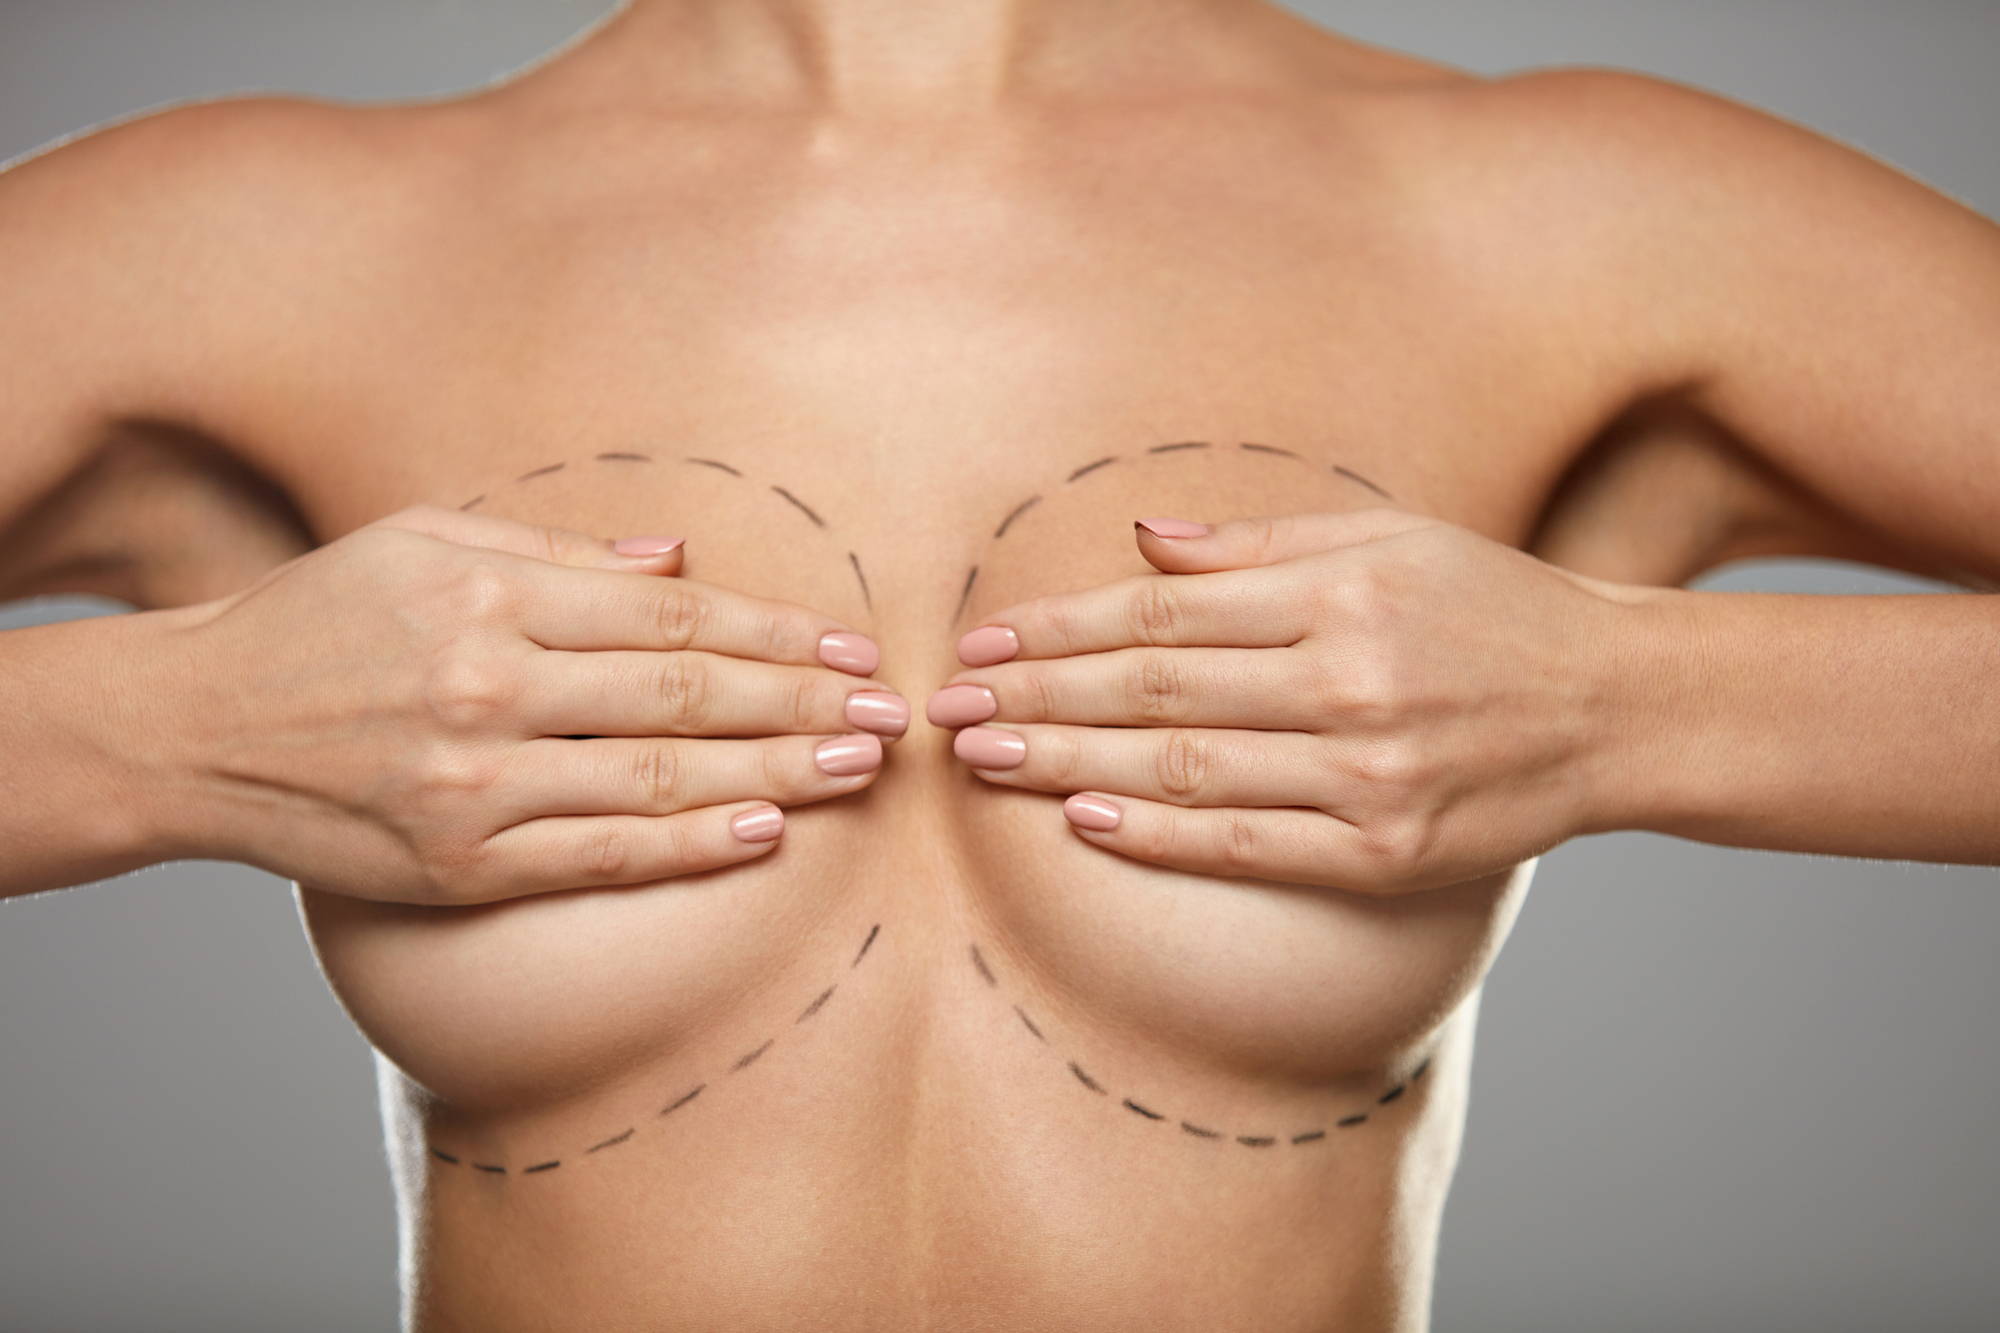 Lift And Firm Your Breasts In 2 Weeks